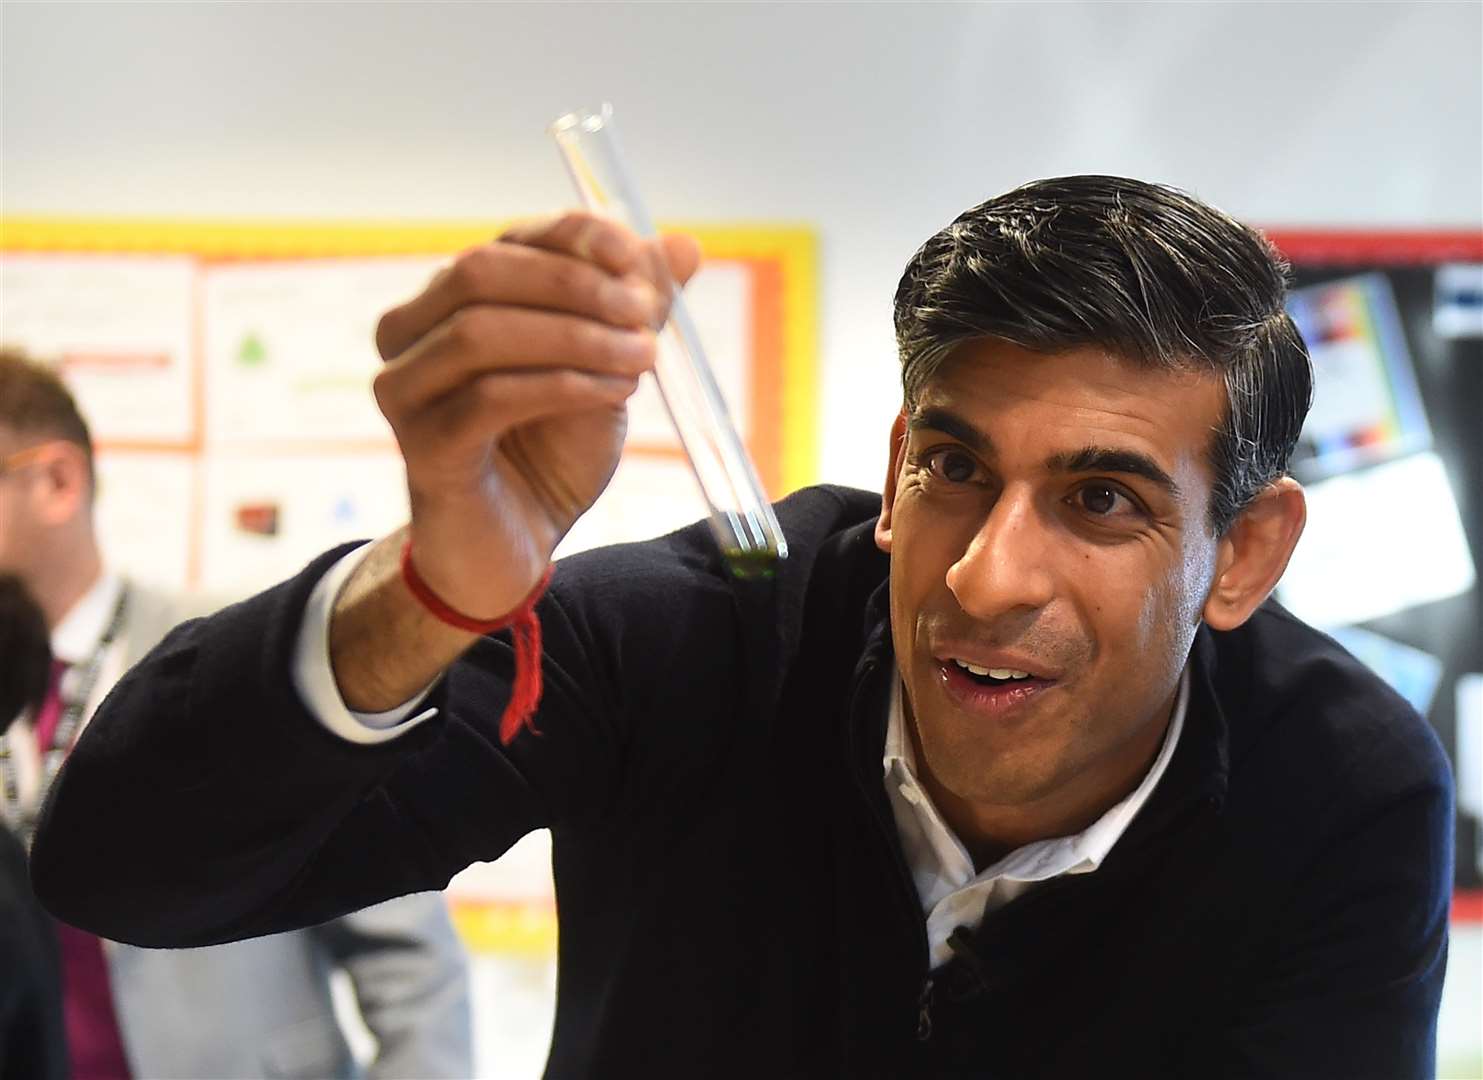 Rishi Sunak was speaking during a visit to Bolsover School in Chesterfield (Peter Powell/PA)